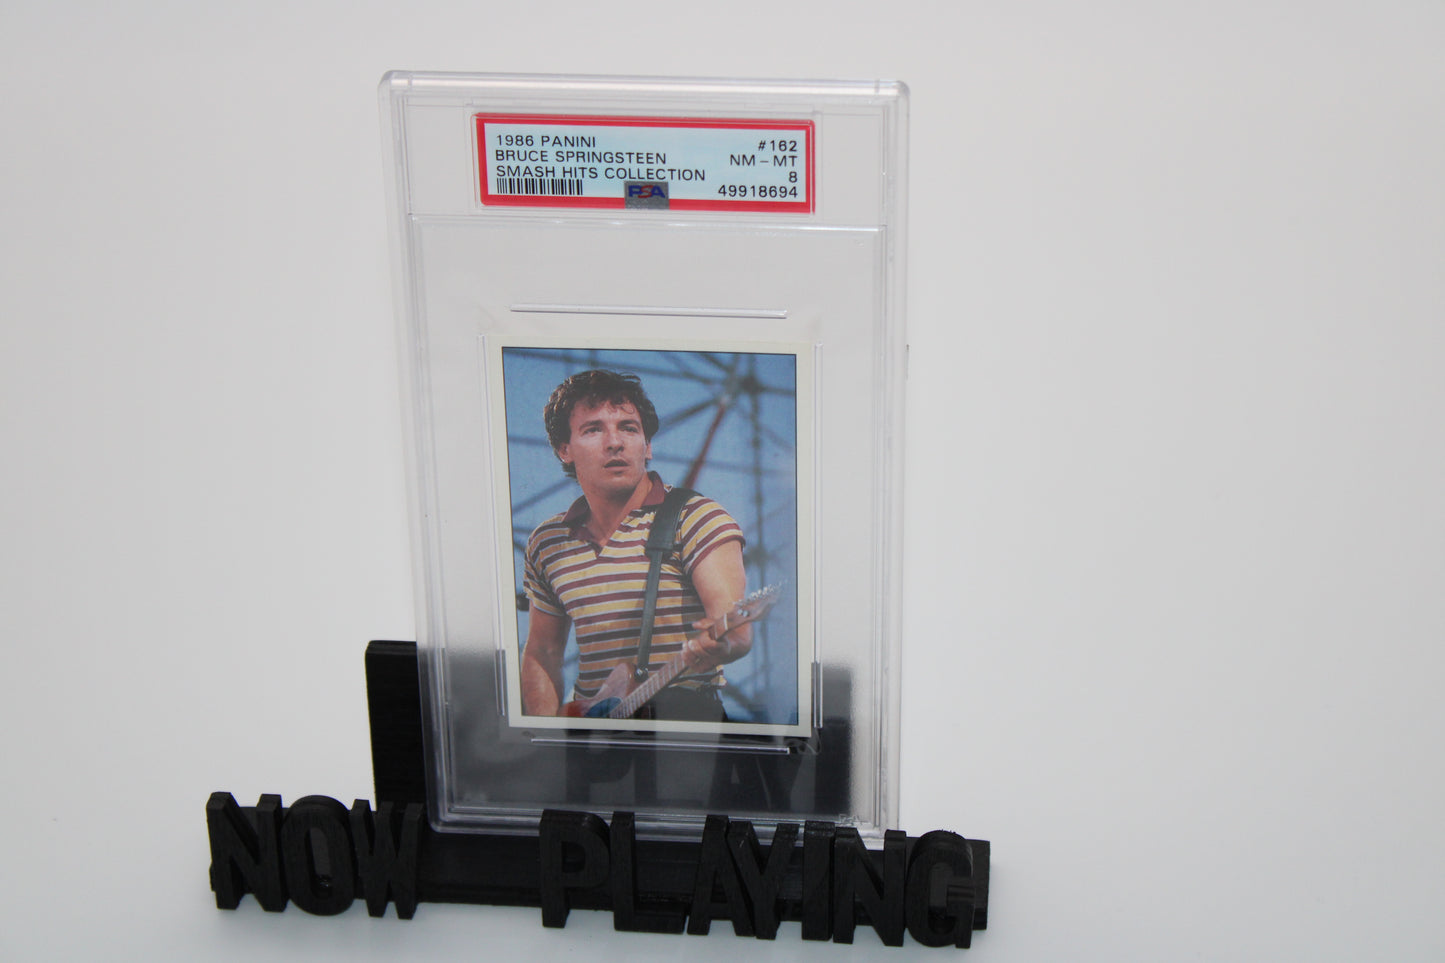 Panini - Bruce Springsteen 1986 Smash Hits Collection #162 NM-MT PSA graded 8 / none higher